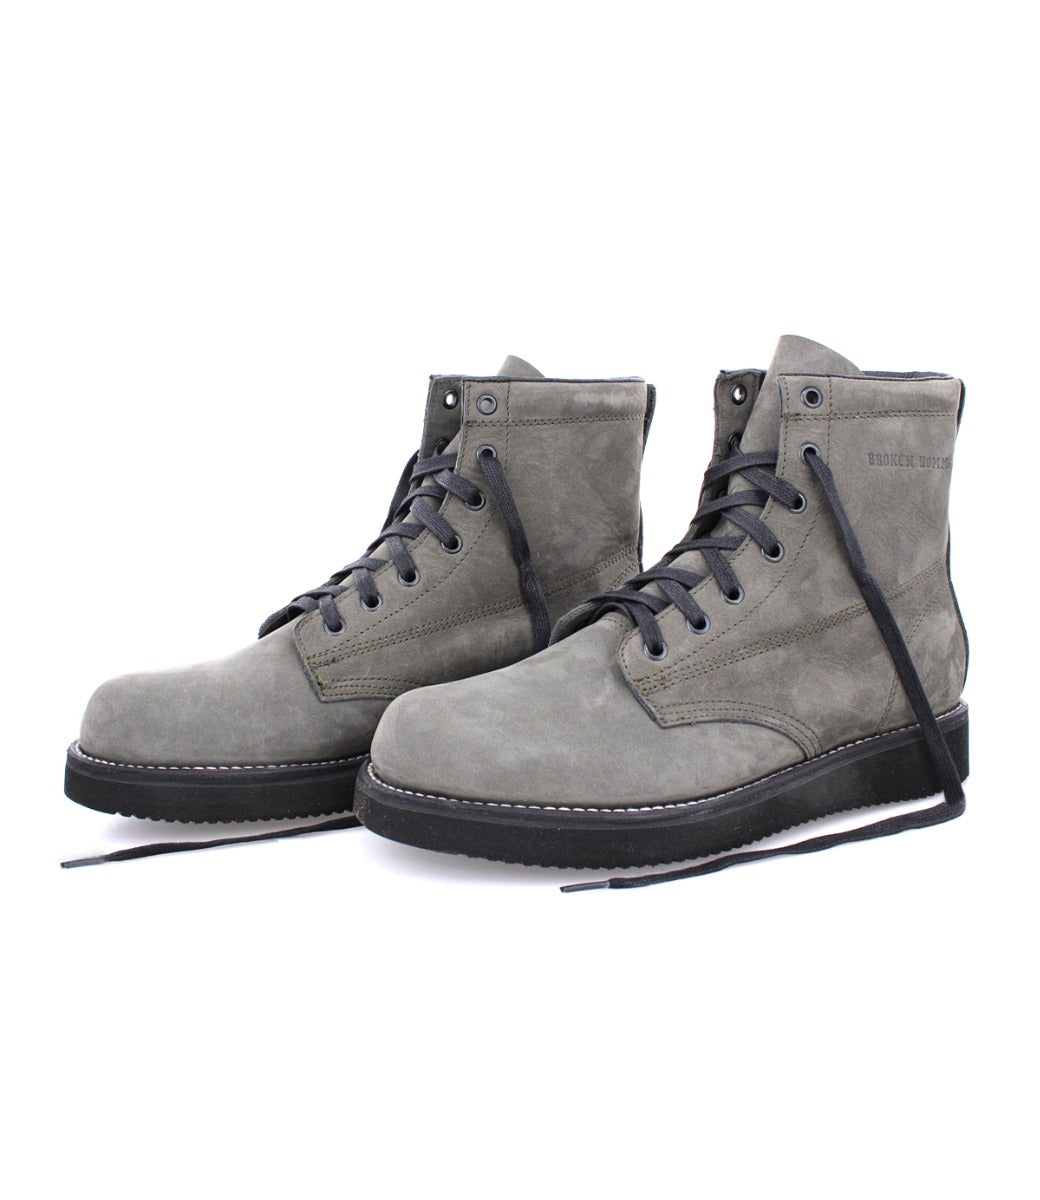 A pair of James Boots from the Broken Homme collection, featuring black laces and a sleek grey design.